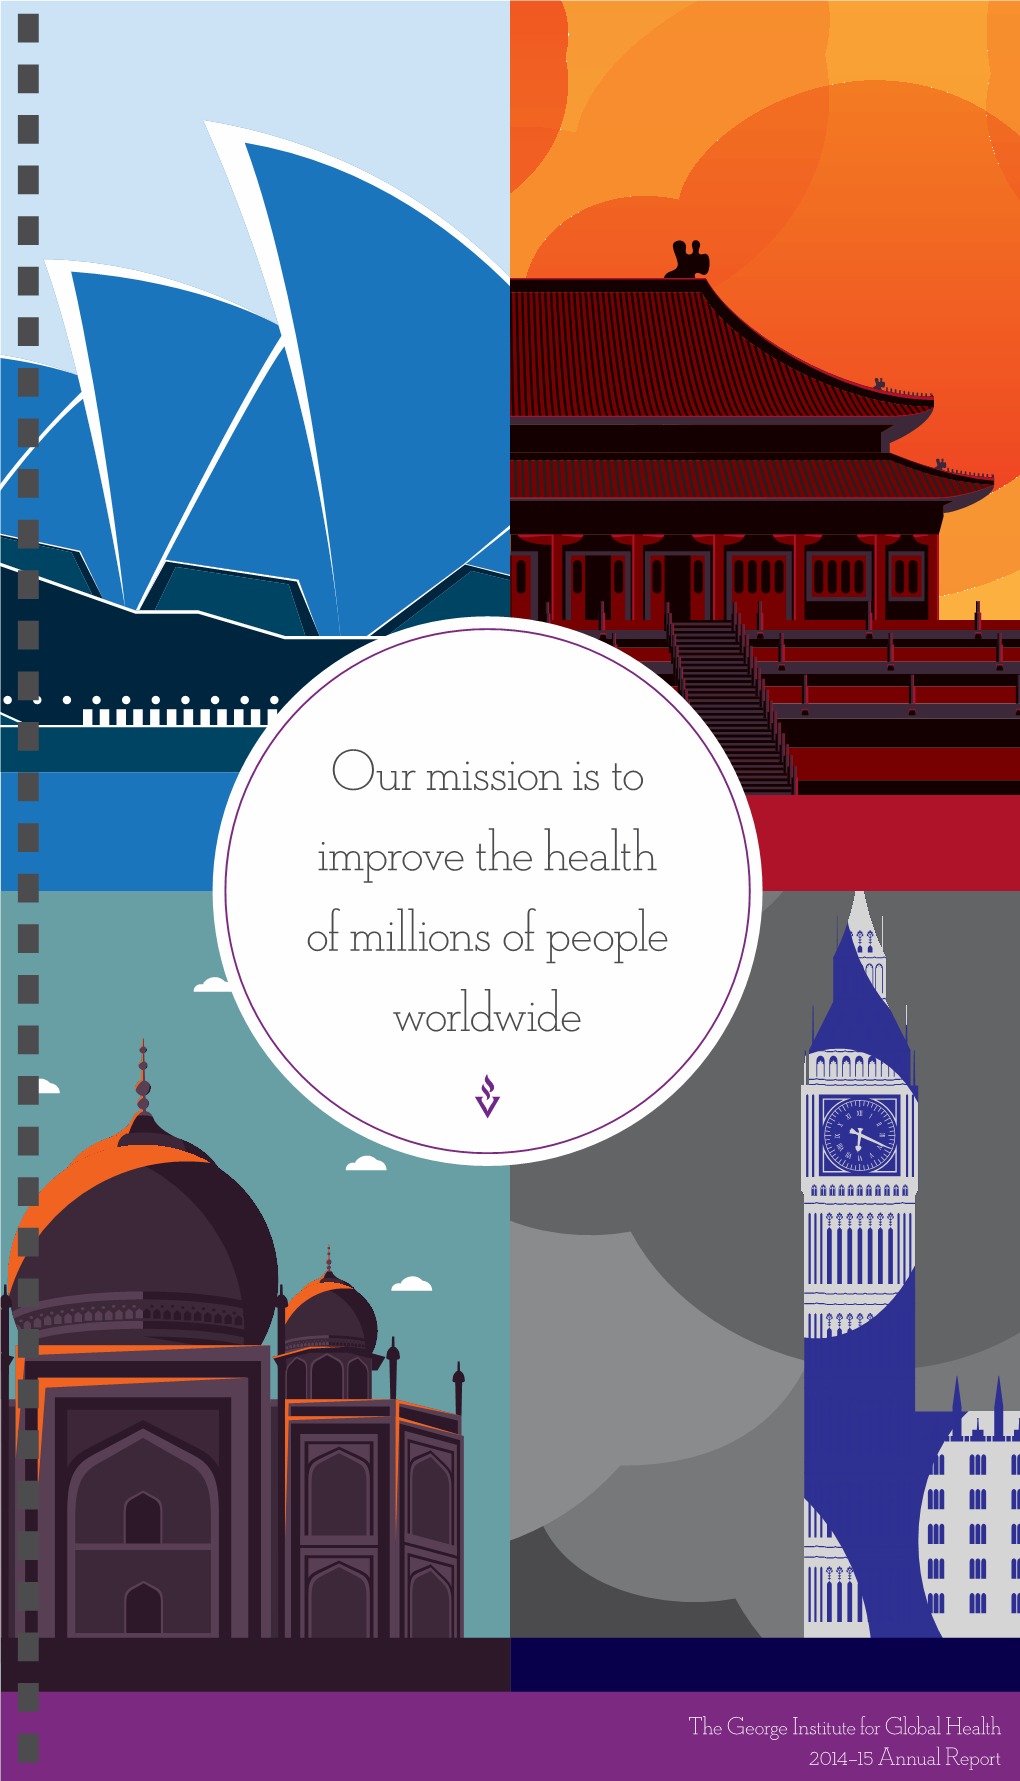 Our Mission Is to Improve the Health of Millions of People Worldwide